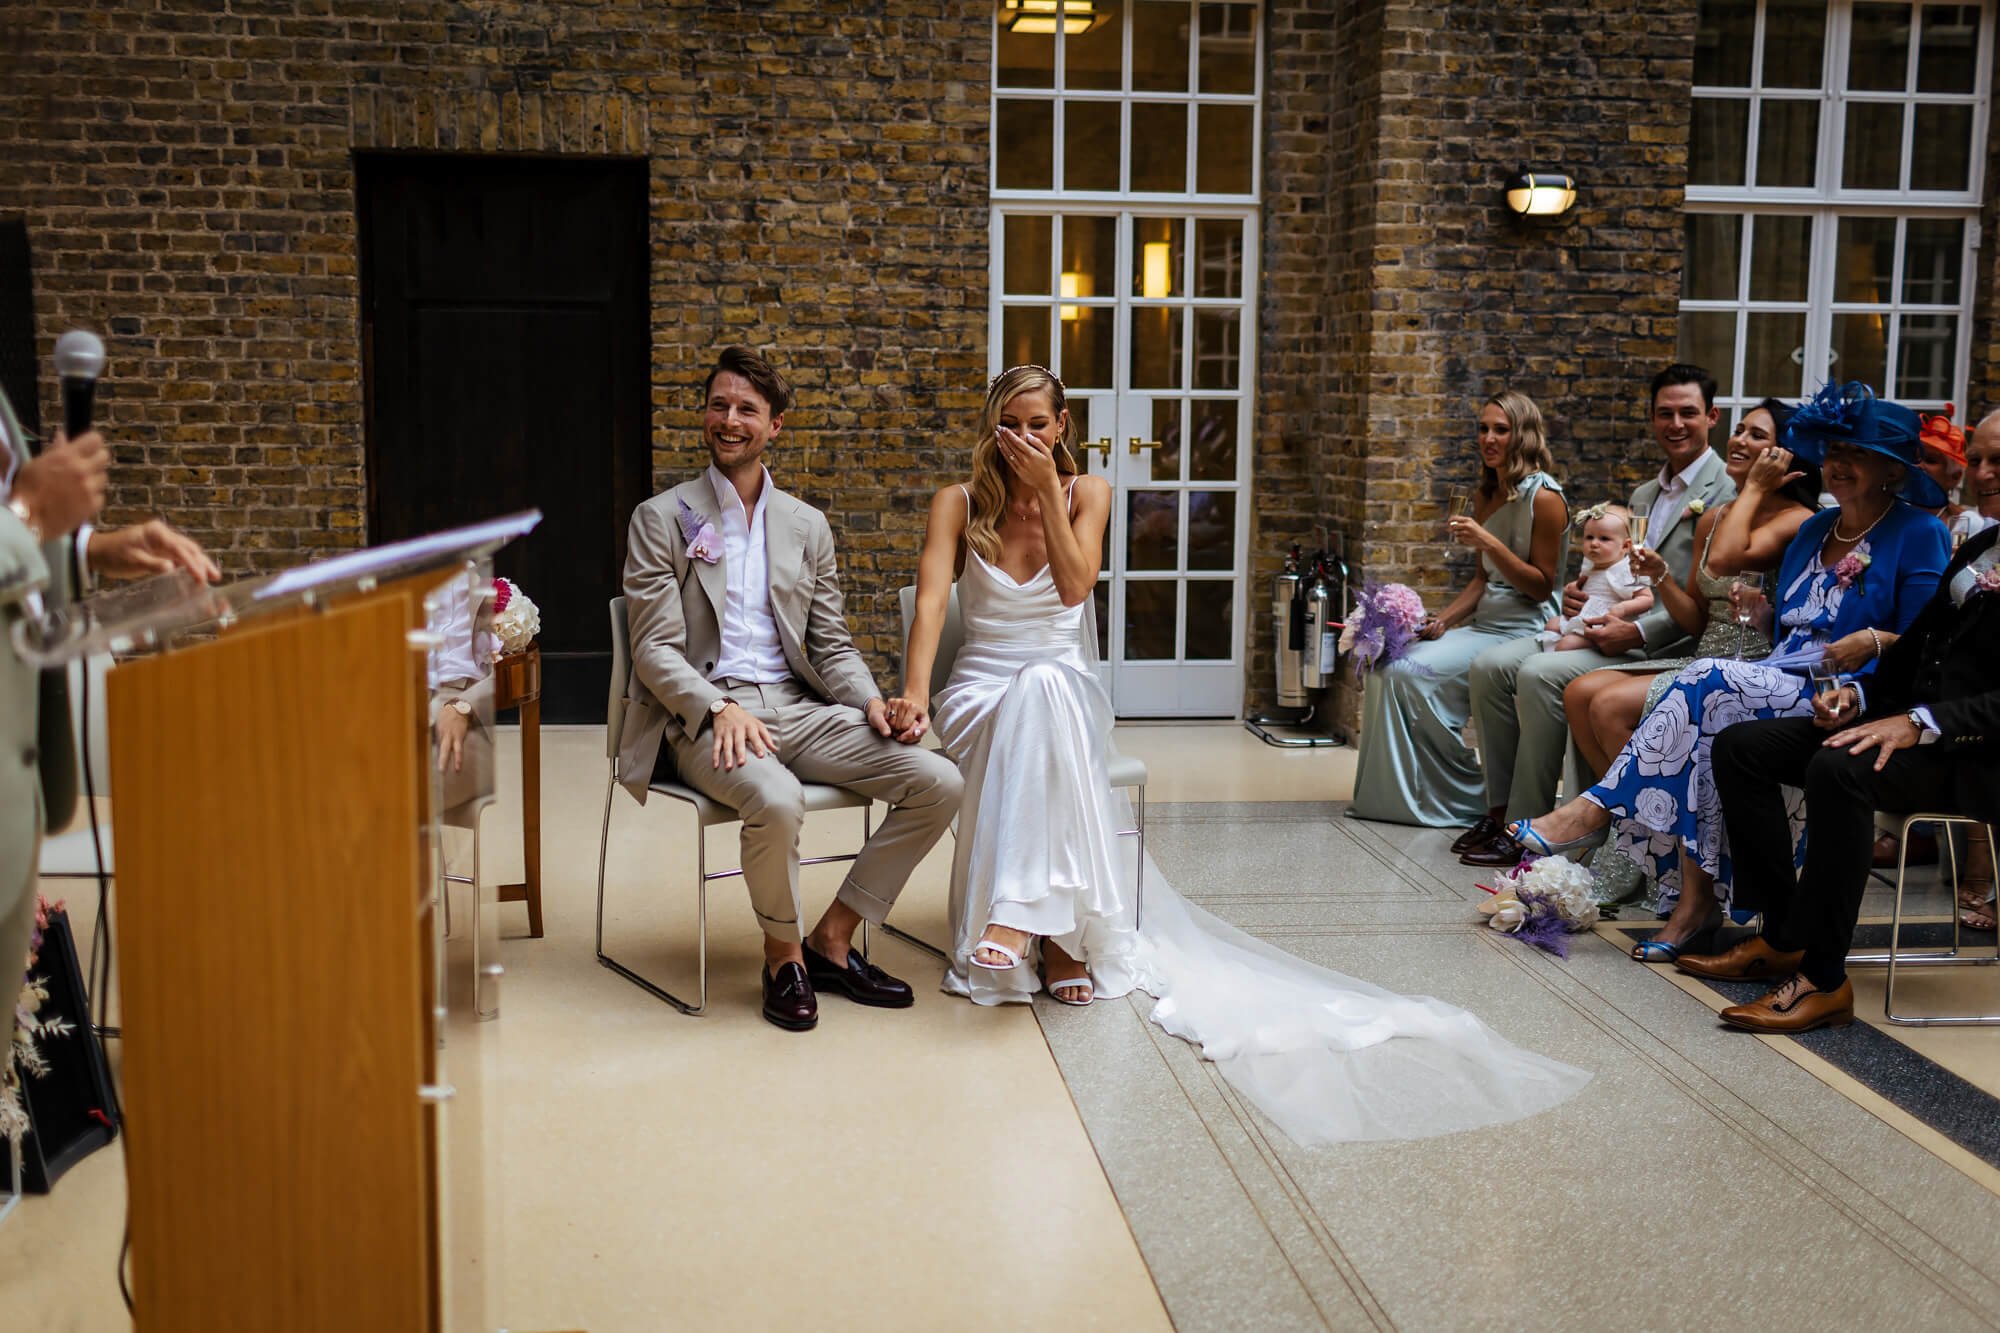 The bride and groom laughing during a reading at their wedding service